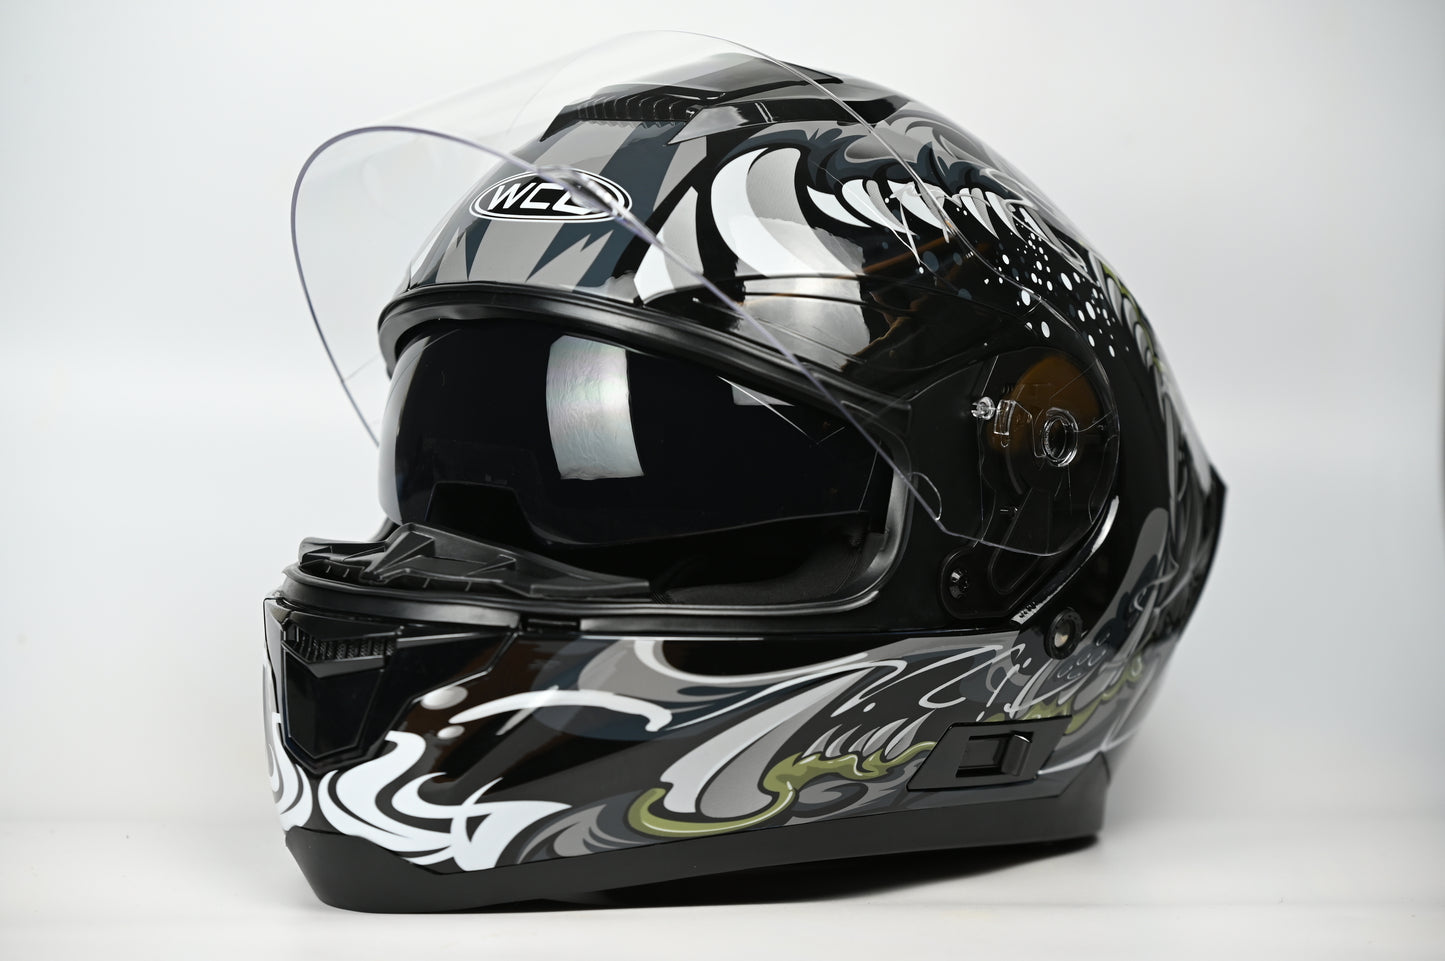 WCL Raider Full Face Motorcycle Helmet - Drop Down Tinted Visor, Quick Release Buckle, DOT Approved - Grey Black WCL Helmet